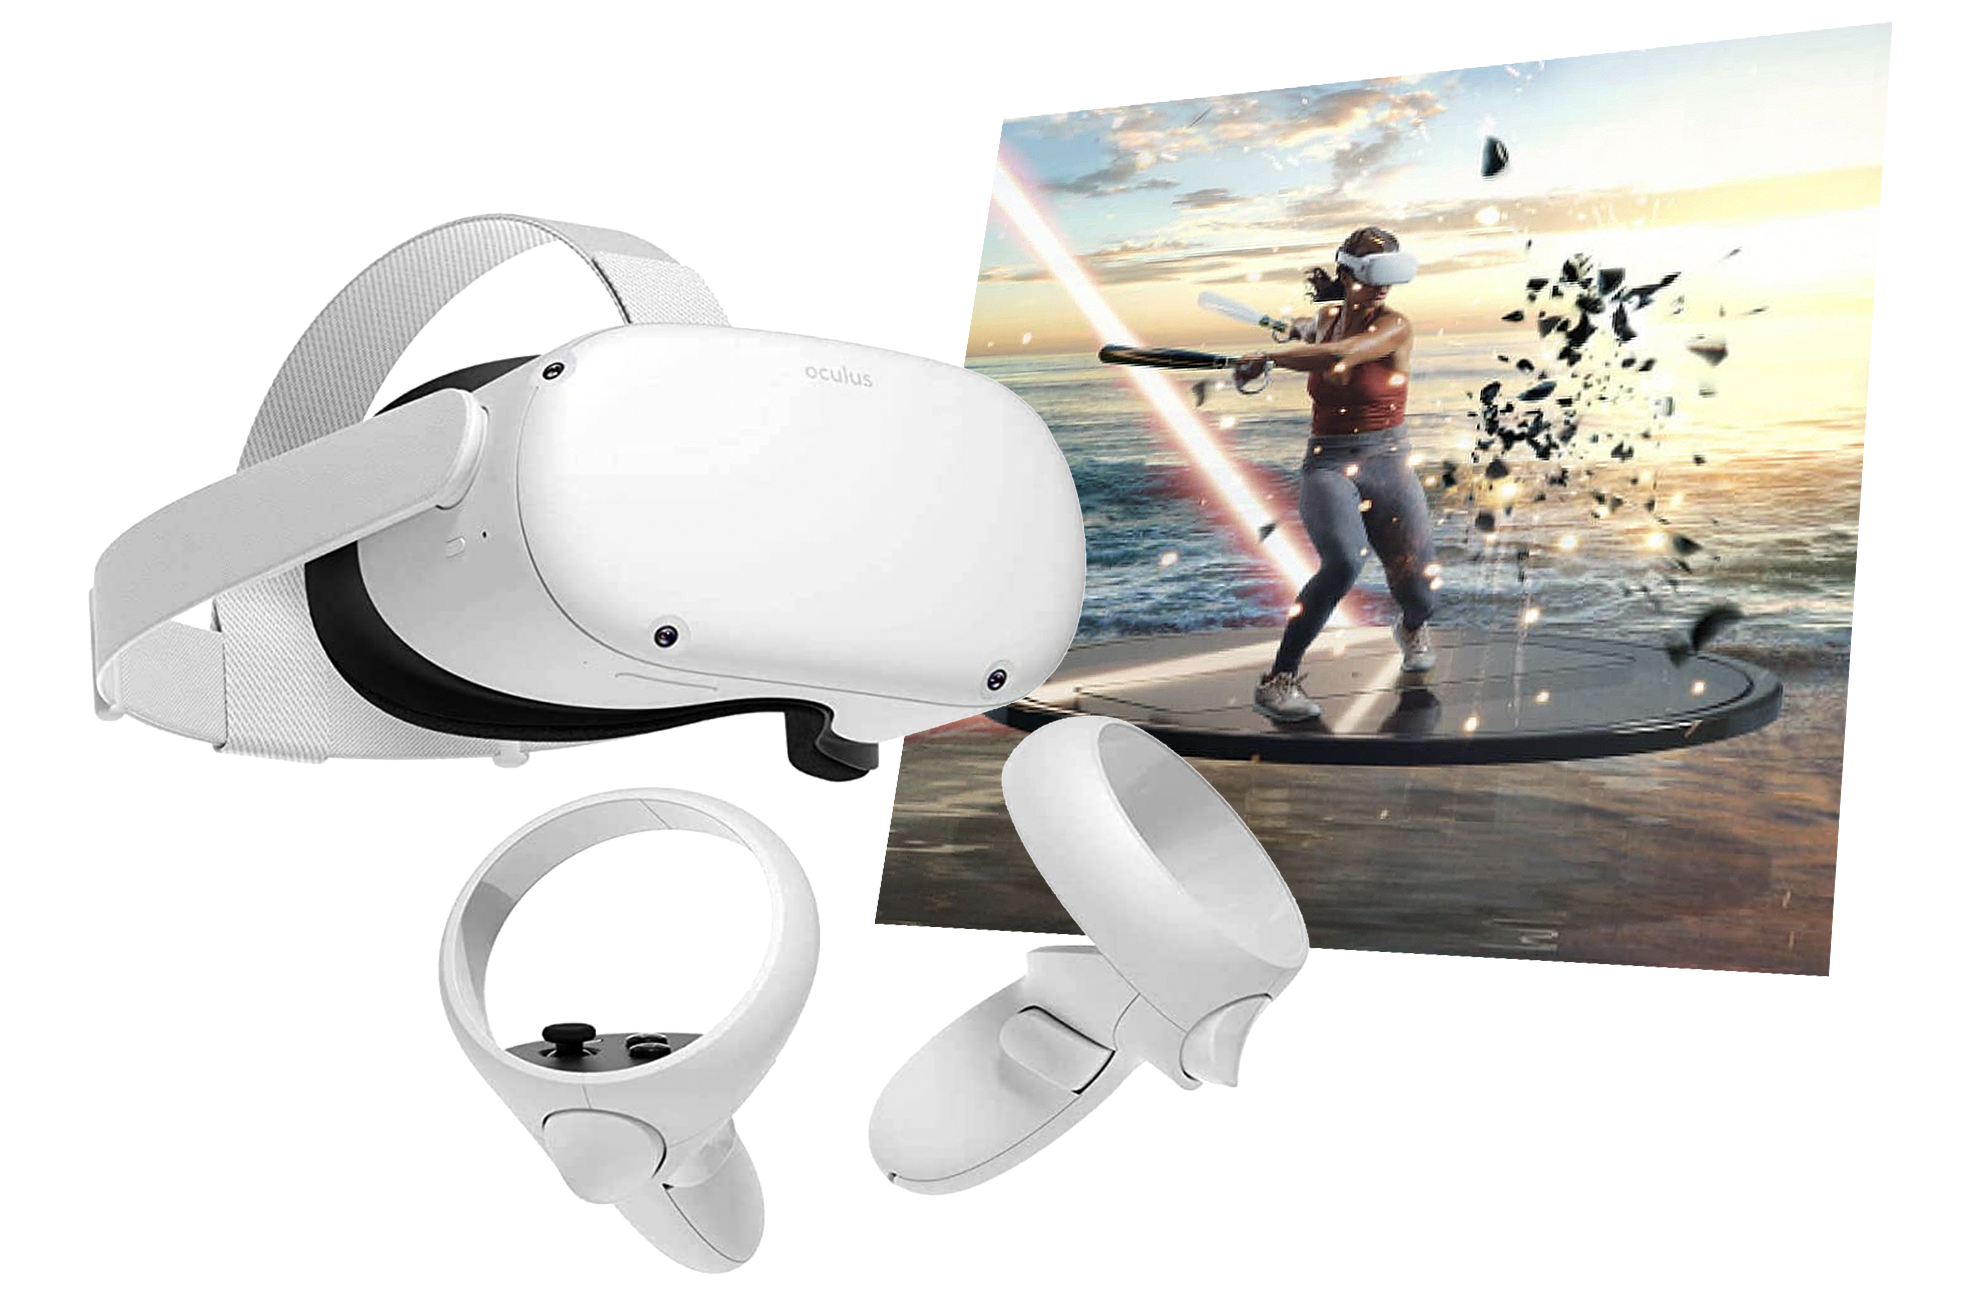 Meta Quest 2 headset with controllers and inset image of a VR game in the background. featured Image